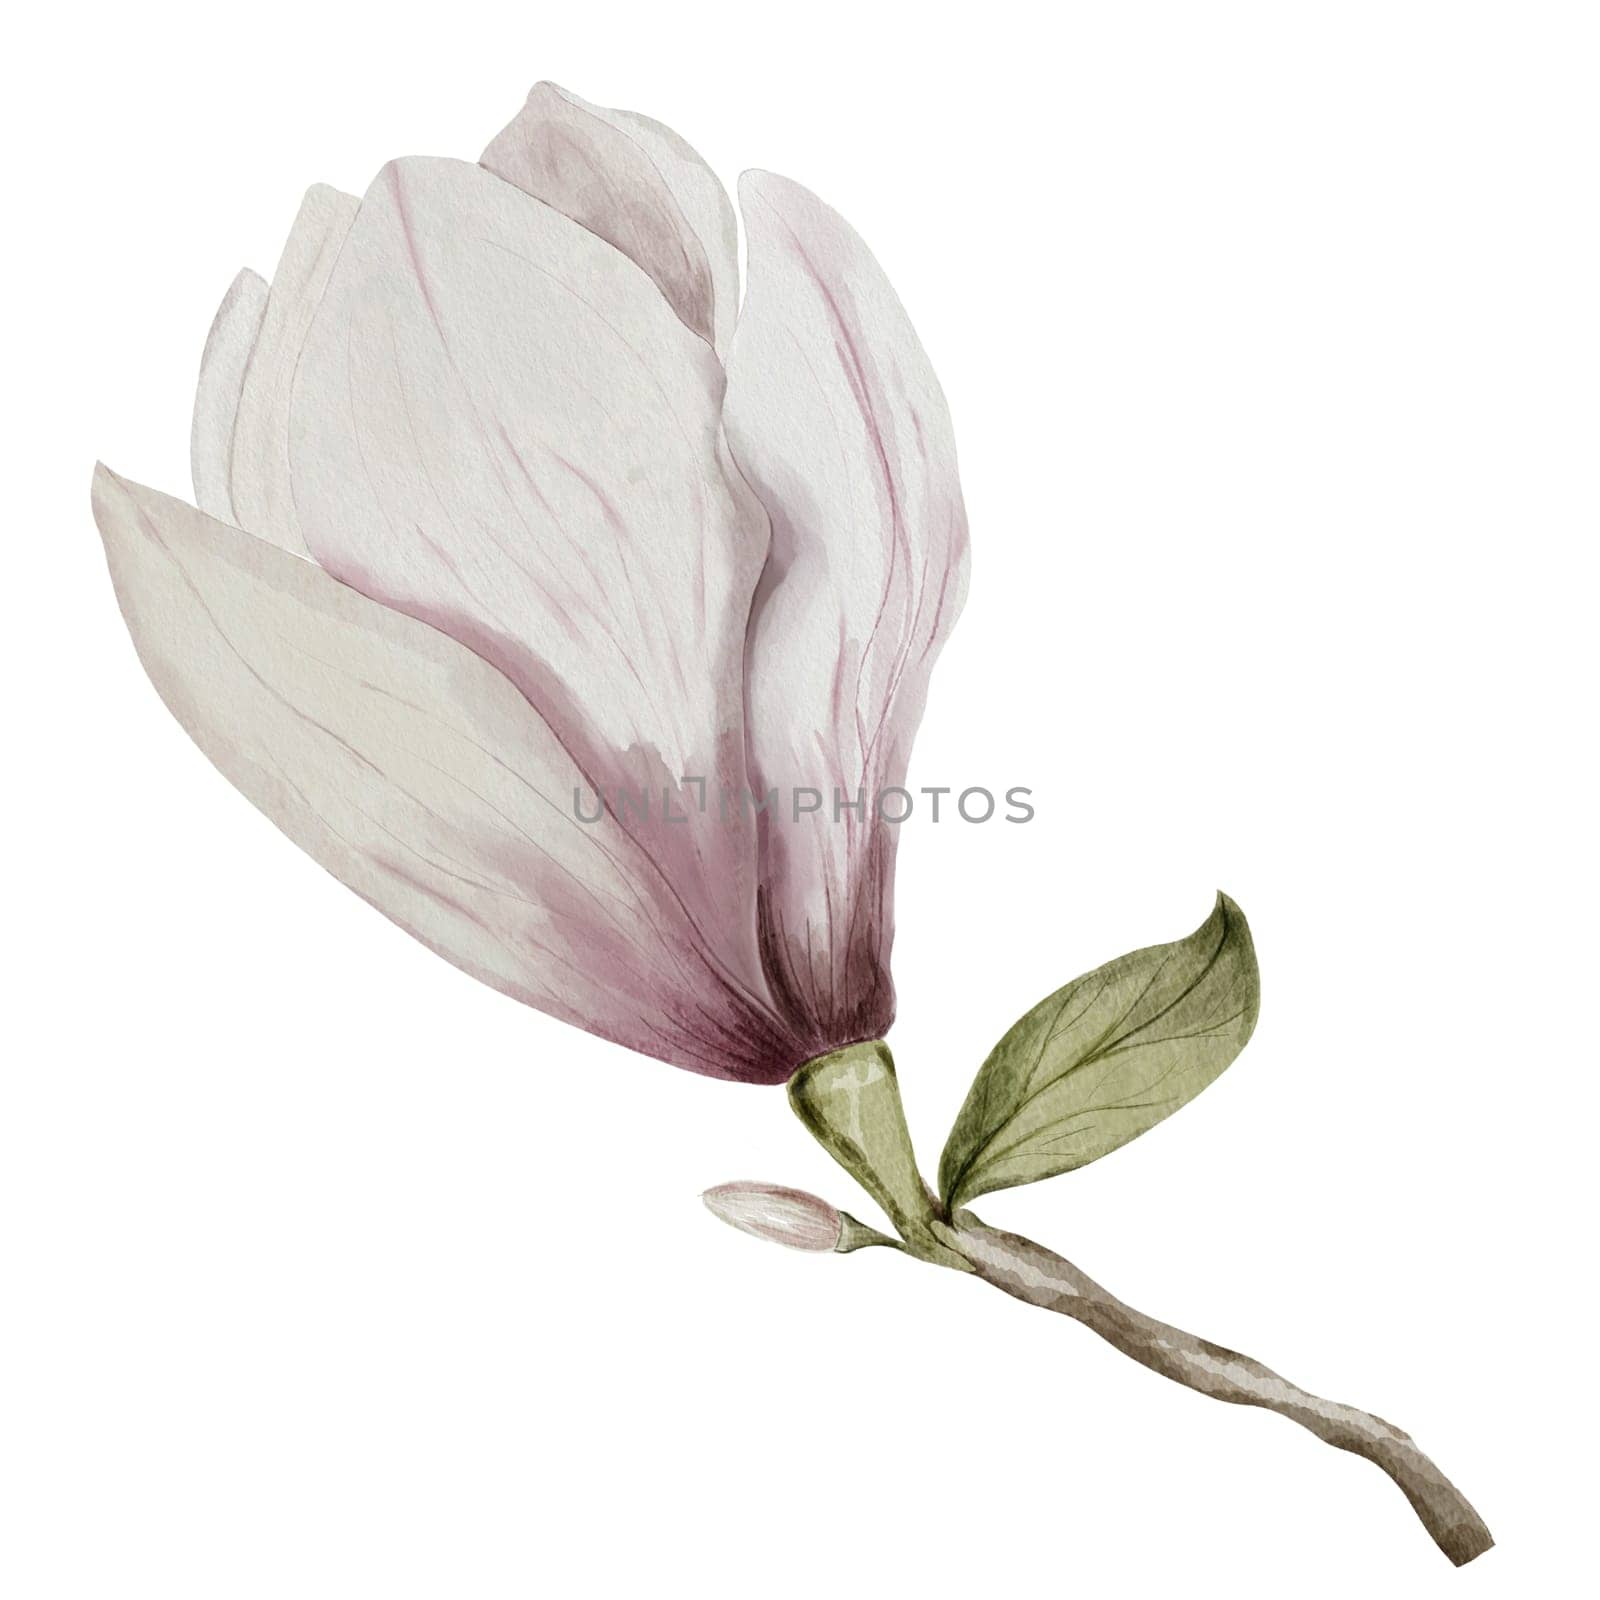 Watercolor magnolia flower isolate on a white background. Vintage flower in pink and white colors for design of cards and invitations for weddings and engagements by TatyanaTrushcheleva